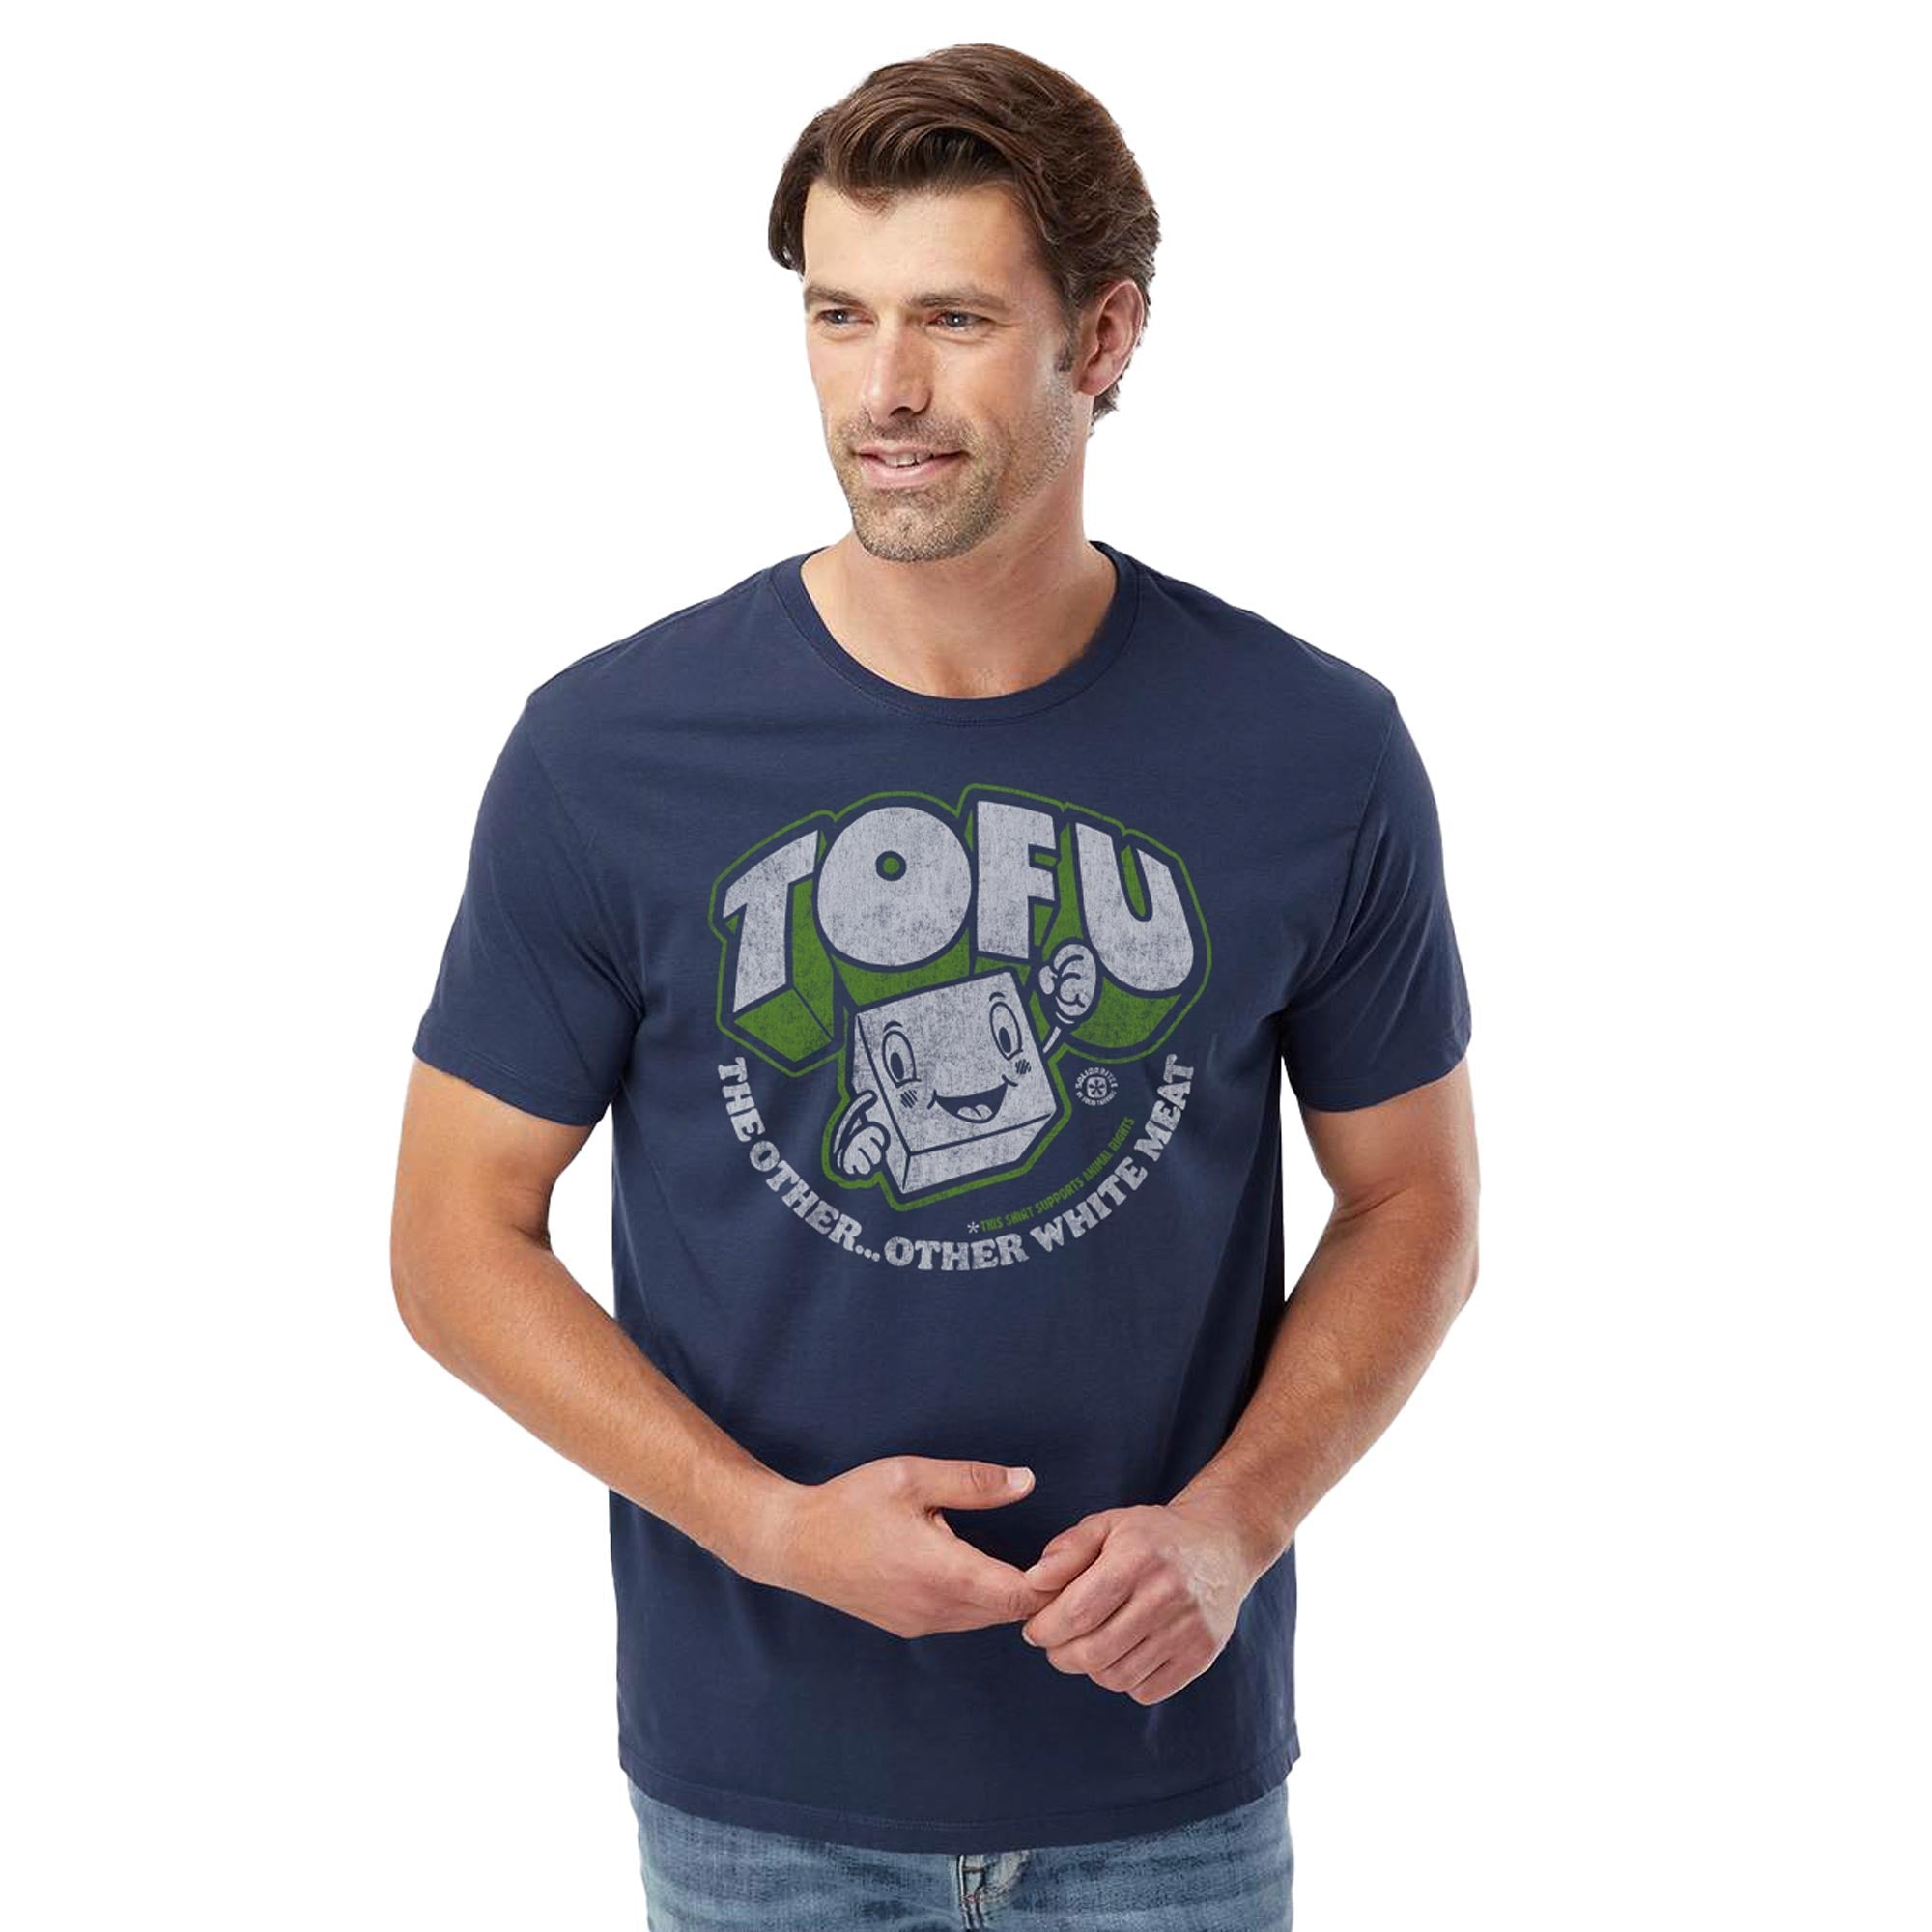 Tofu,The Other Other White Meat | Supports Animal Rights Vintage Organic Cotton T-shirt | Funny Vegan Food  Tee On Model | Solid Threads